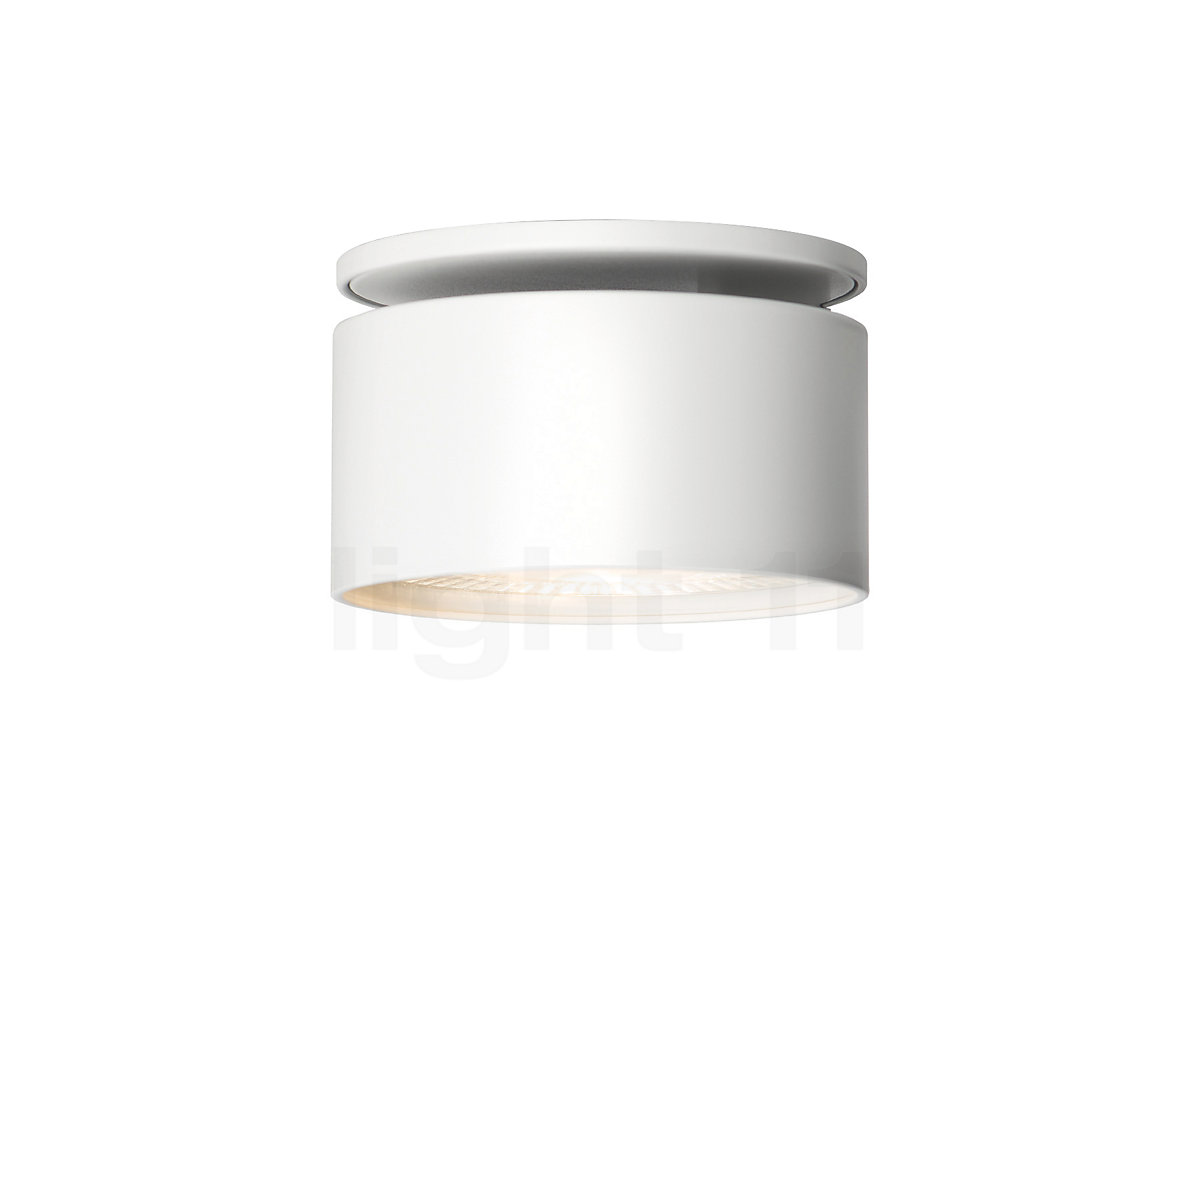 Mawa Wittenberg 4 0 Recessed Ceiling Light Round With Cover Plate Led Excl Transformer